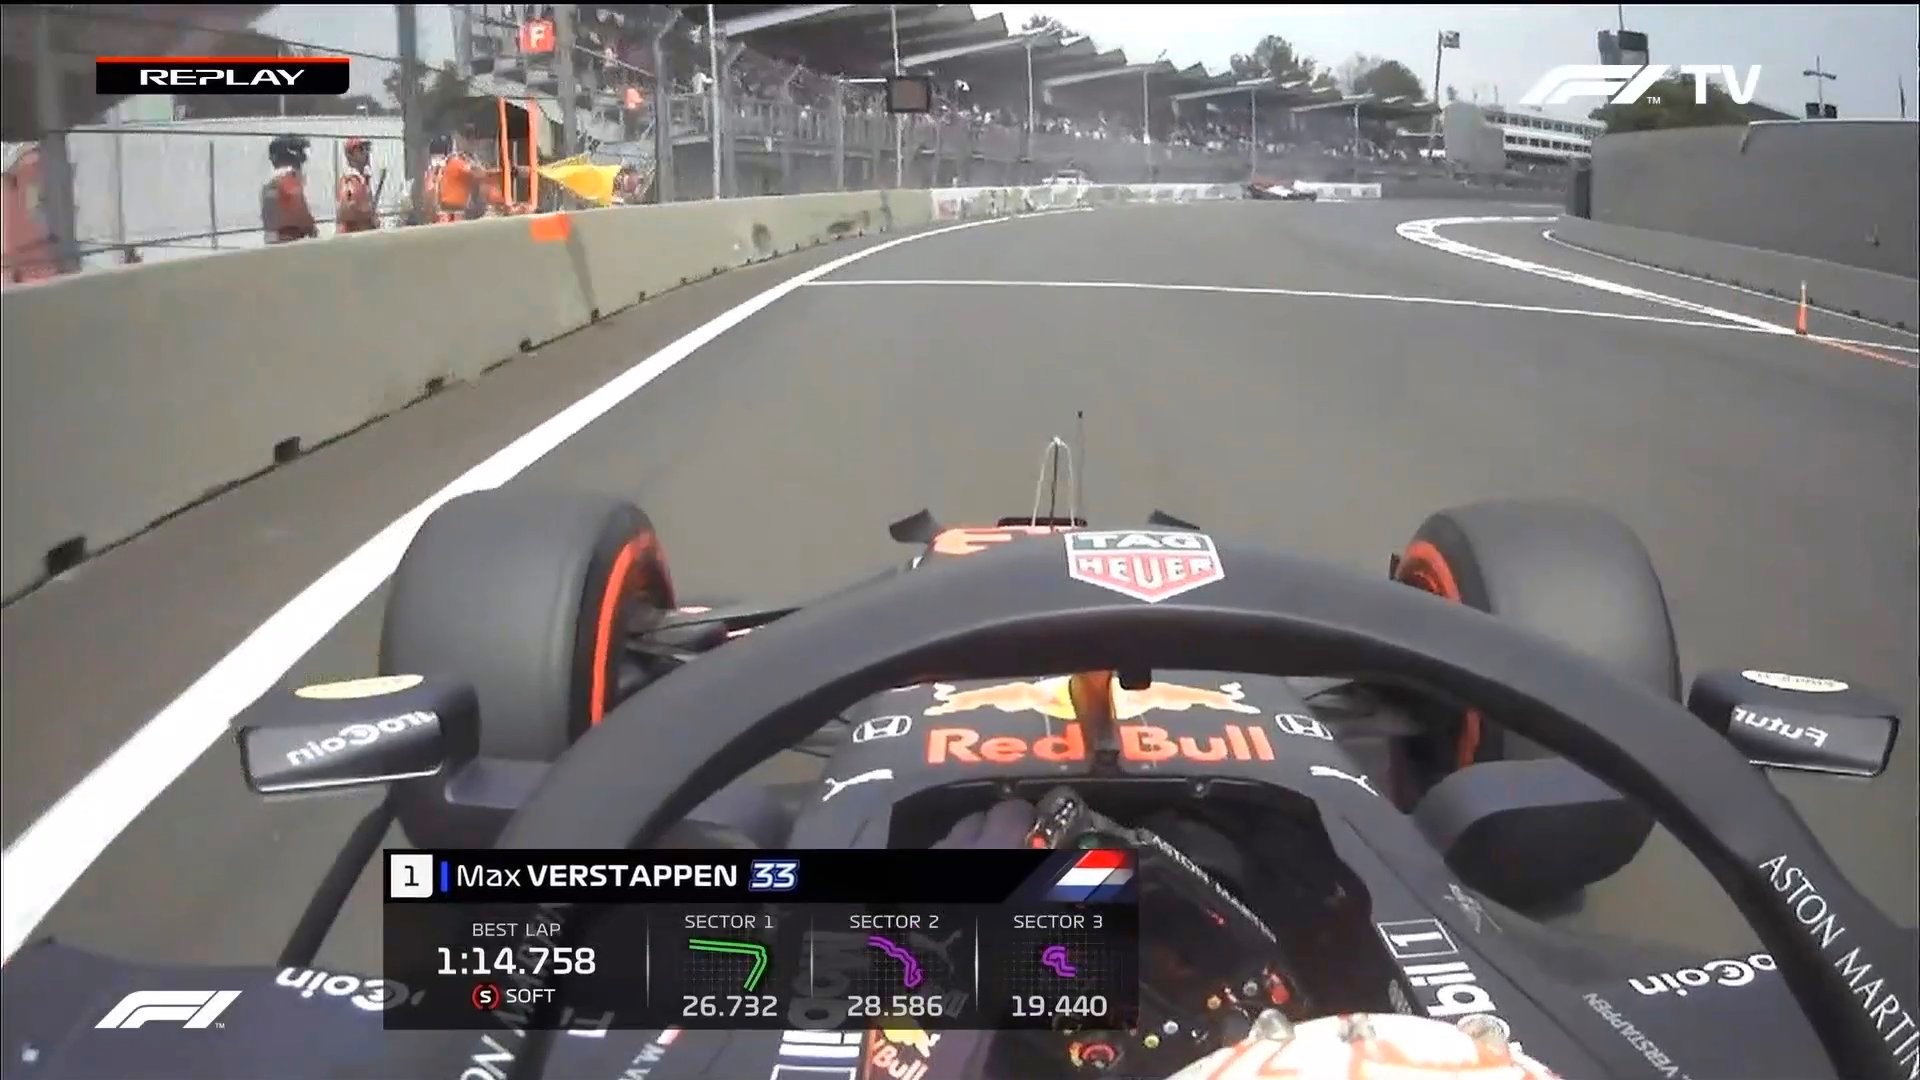 Clearly Verstappen saw the yellow to his left and Bottas' car in the barrier, yet he never lifted